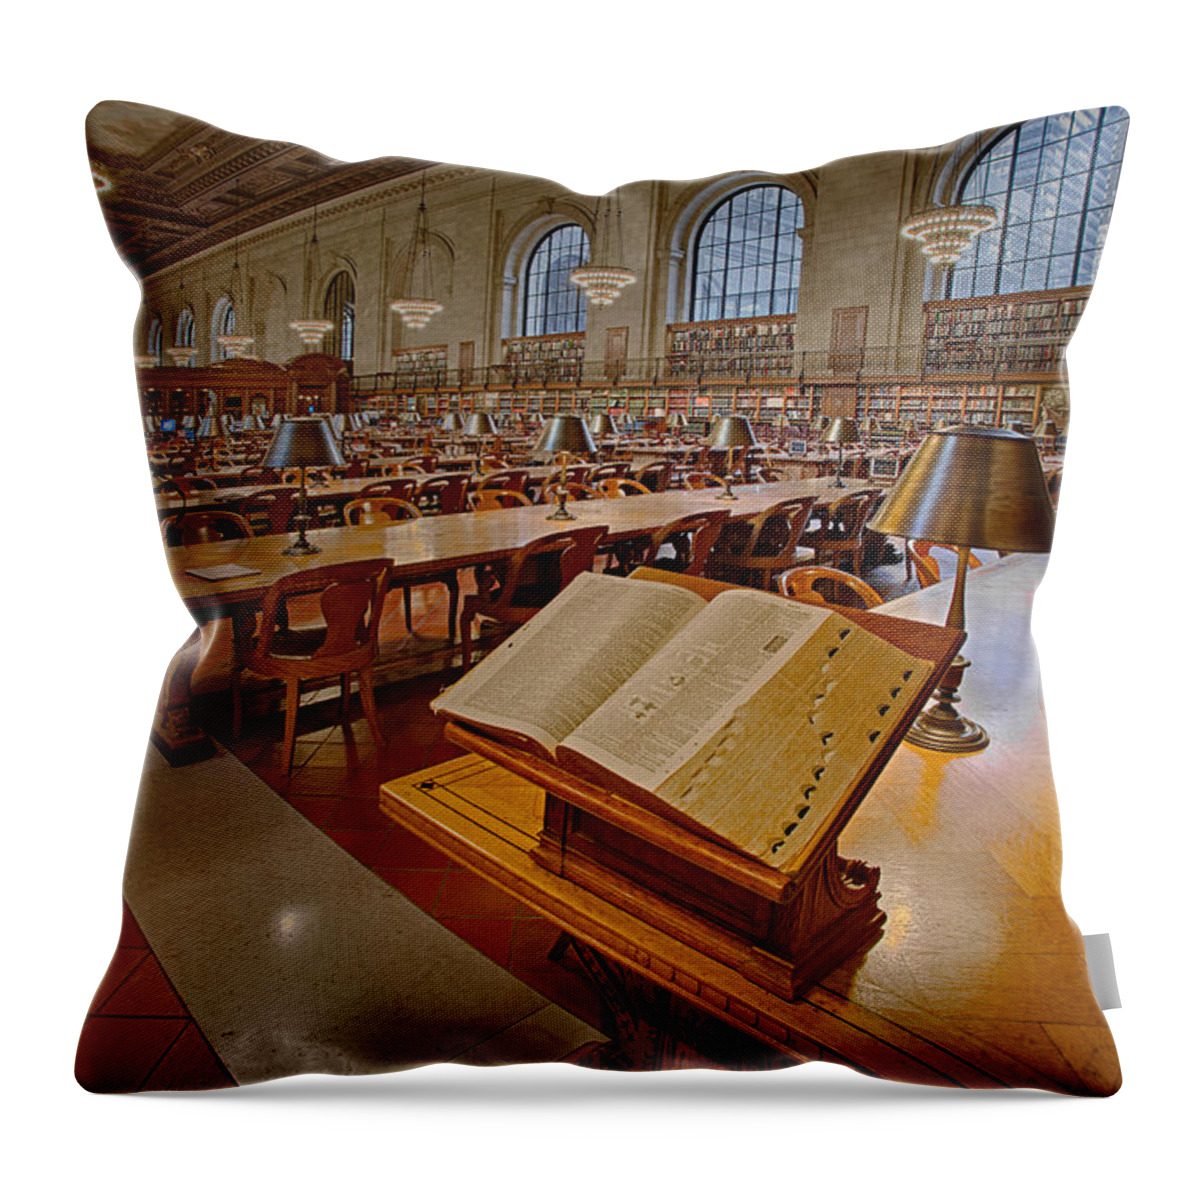 The New York Public Library Throw Pillow featuring the photograph New York Public Library Rose Main Reading Room by Susan Candelario